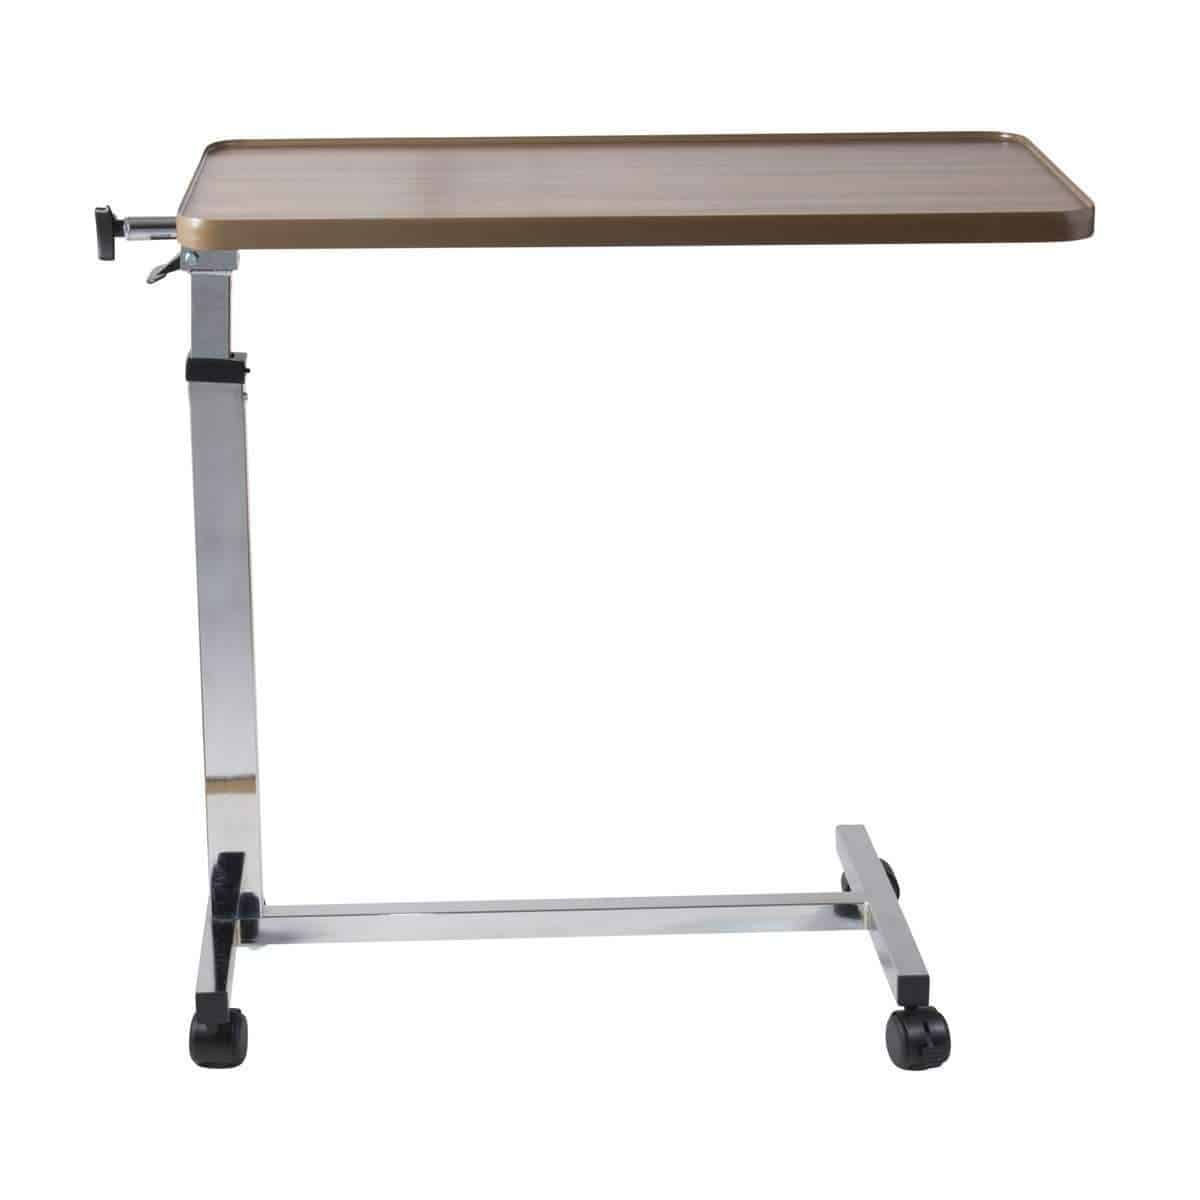 DMI Deluxe Heavy Duty Overbed Tilt-Top Table - Adjustable Height - Senior.com Overbed Tables